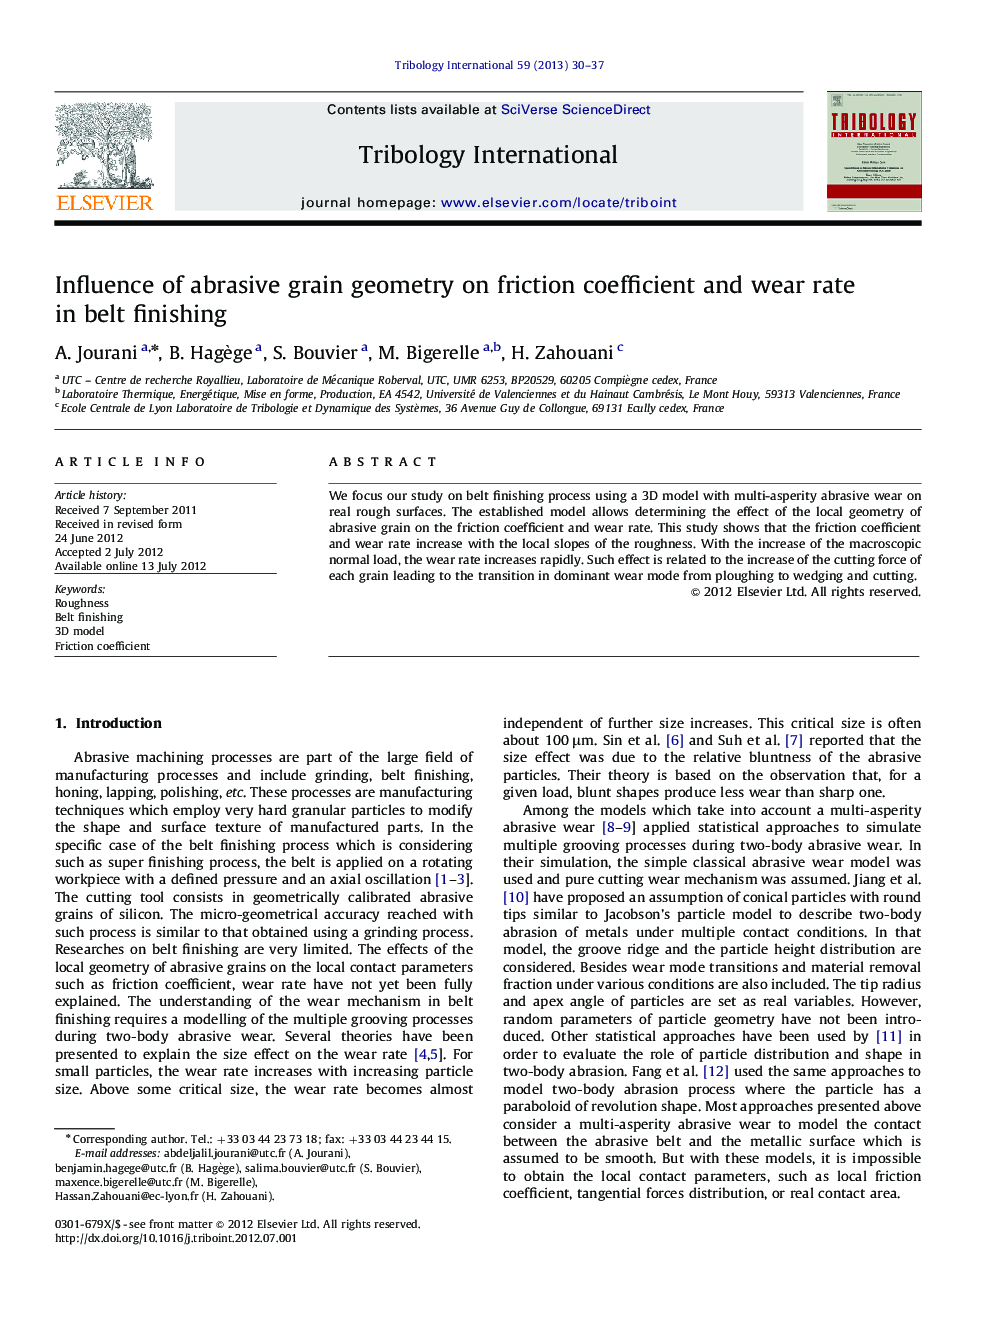 Influence of abrasive grain geometry on friction coefficient and wear rate in belt finishing